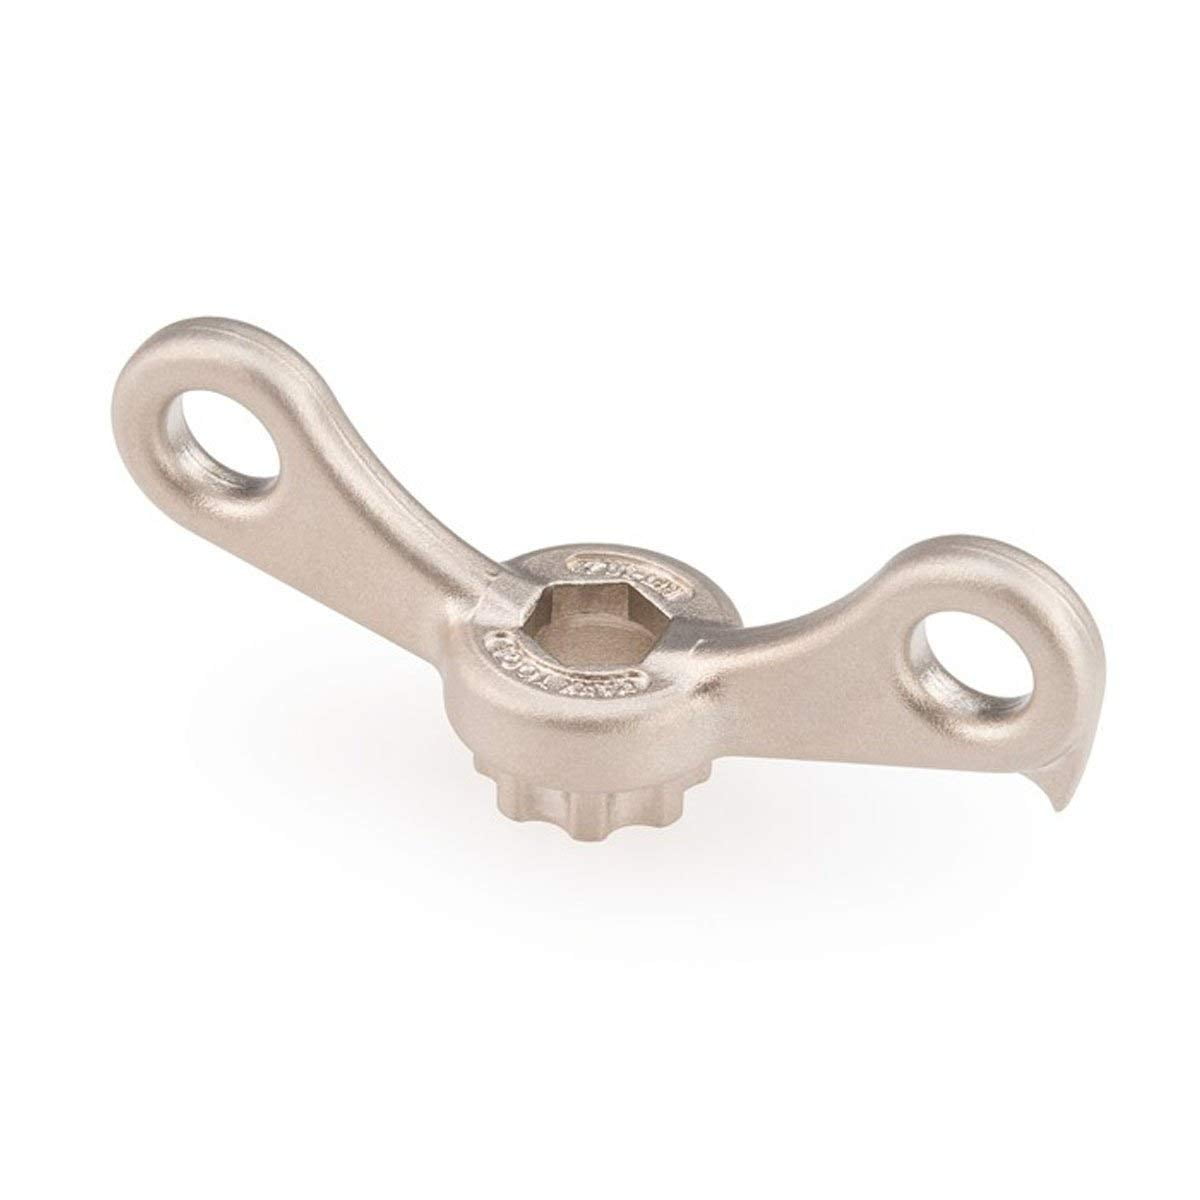 BBB CrankGrip Shimano Crank Tool For Hollowtech II Chainsets 